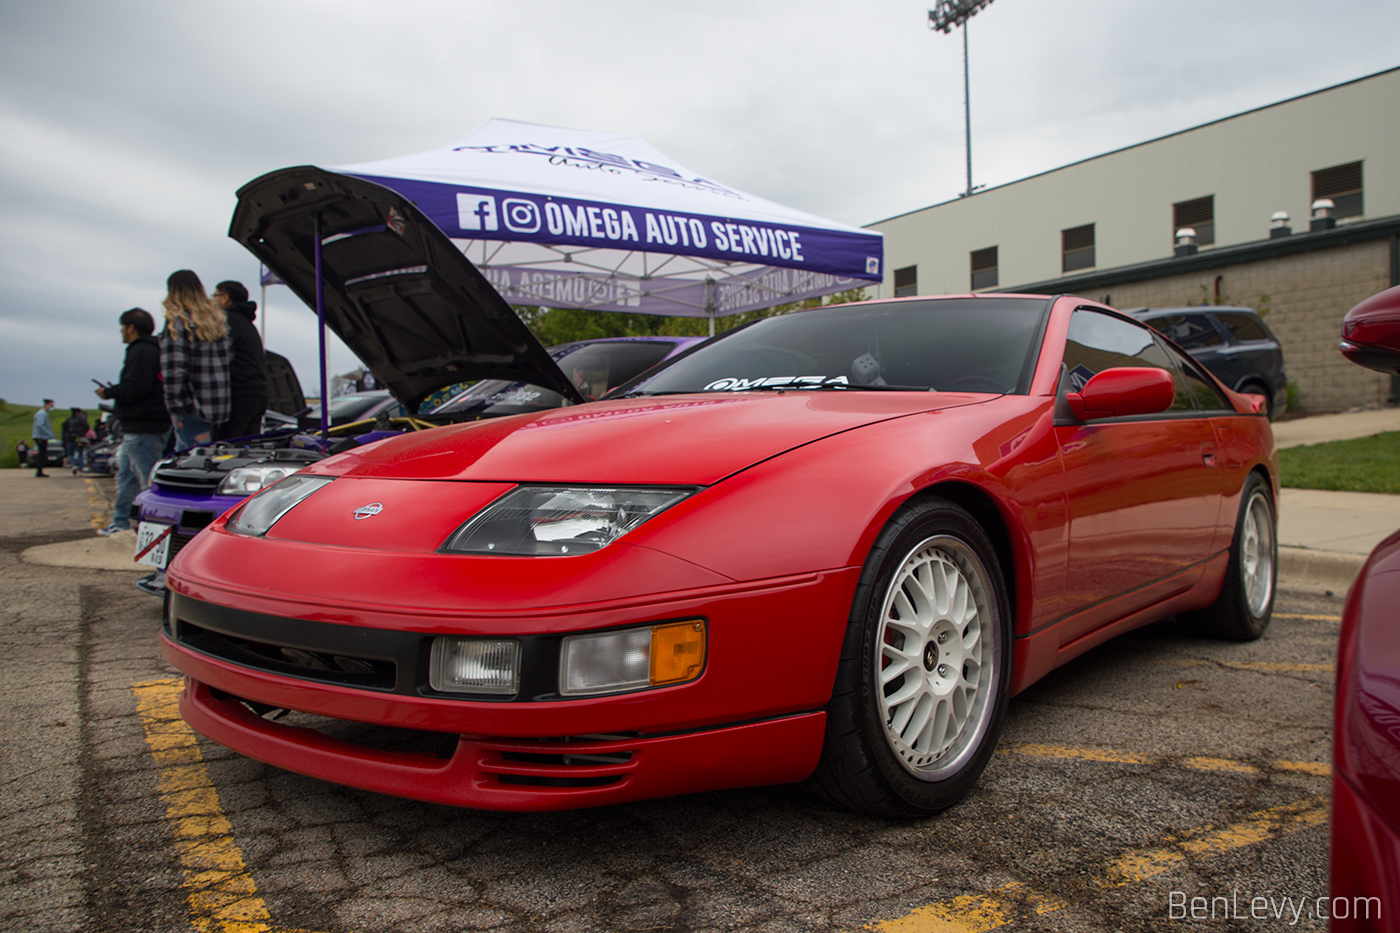 Red Nissan 300ZX at the Omega Auto Service Booth